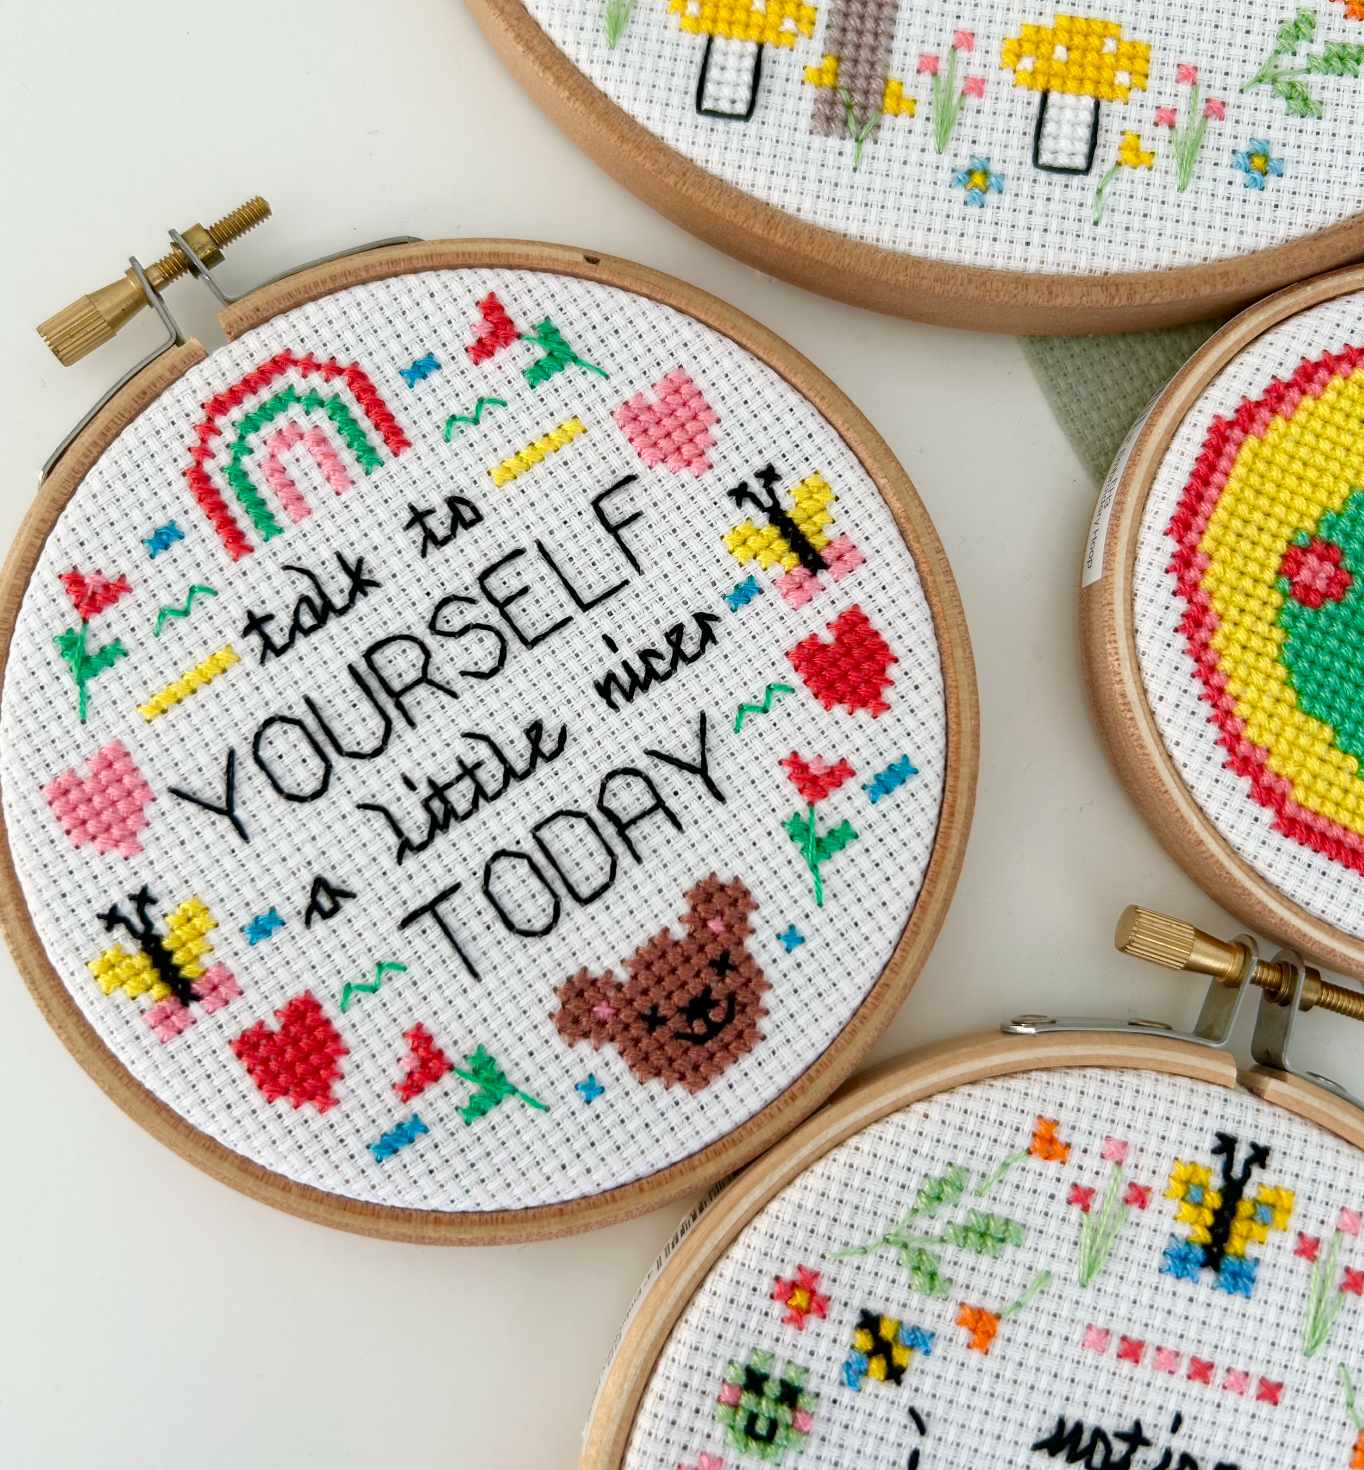 Talk to yourself a little nicer today  - *Cross Stitch Kit*